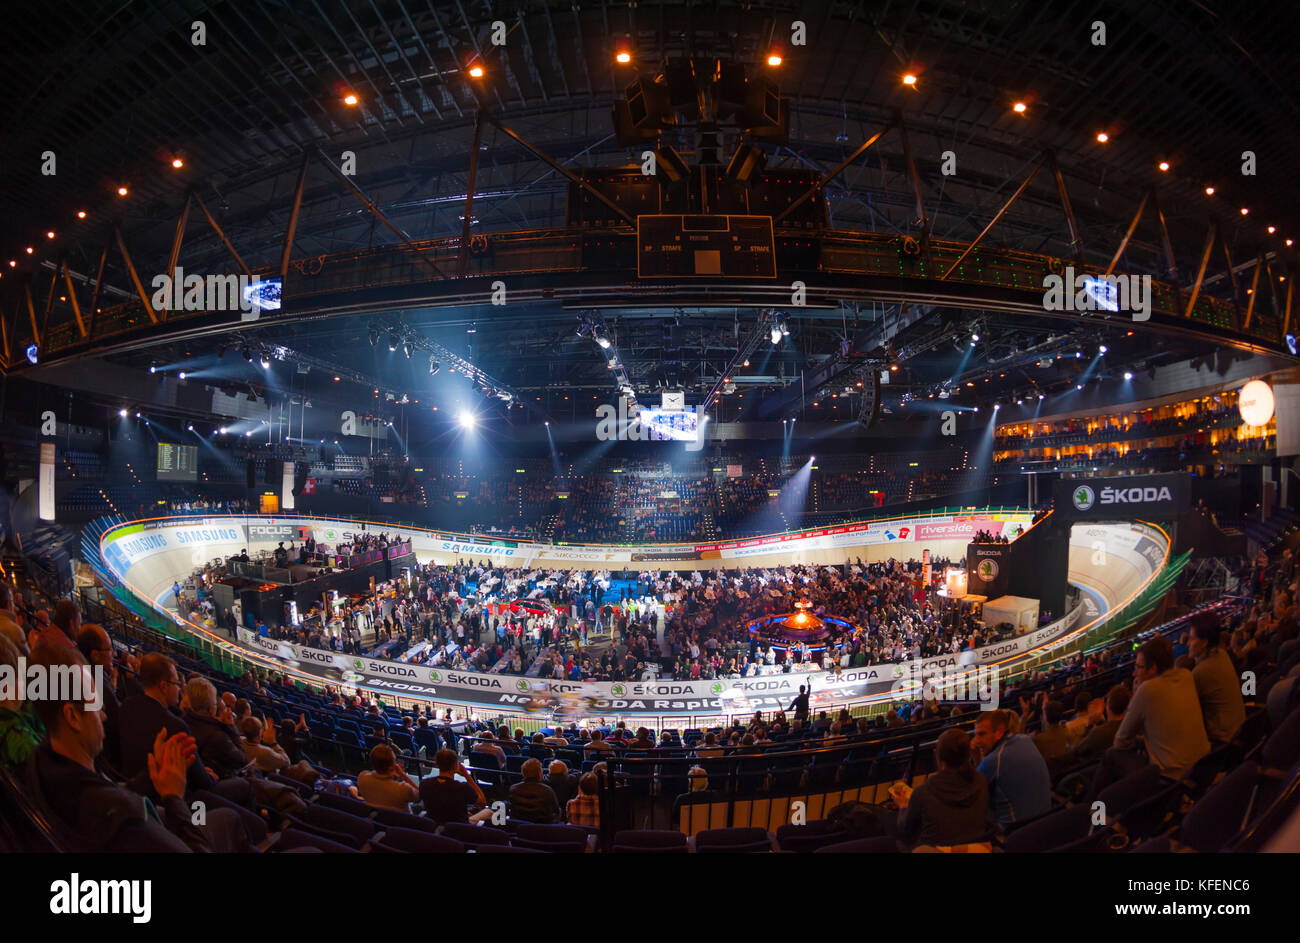 Zurich, Switzerland - 28 Nov 2013: A 200m wooden bicycle race track is built into Zurich's packed Hallenstadion to host the 2013 six day cycle race. (distortion from fisheye lens) Stock Photo